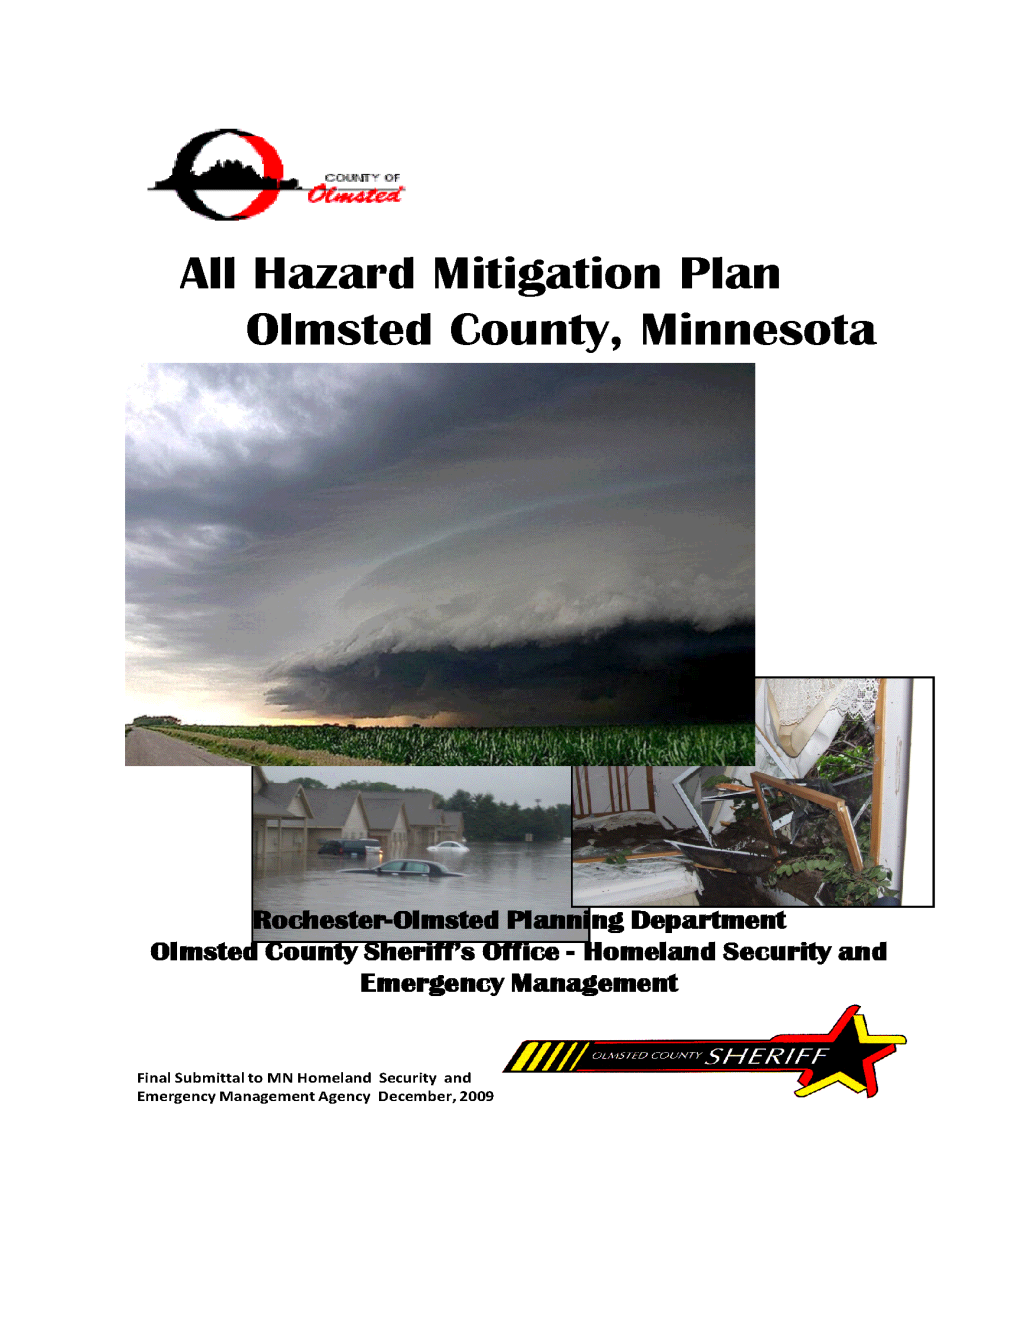 Olmsted County Hazard Mitigation Plan